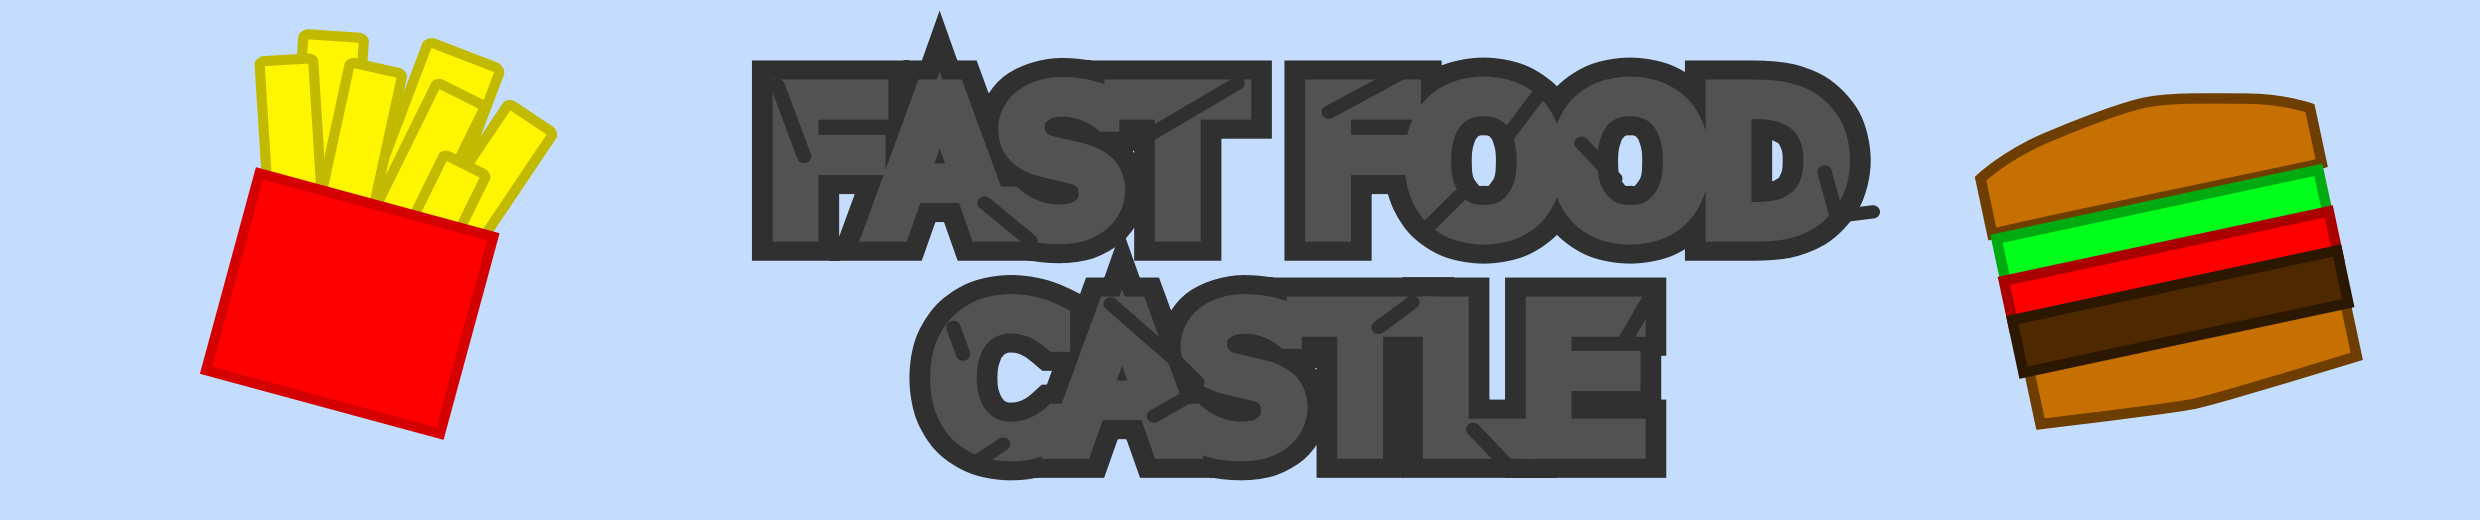 Fast-Food Castle [CANCELLED]